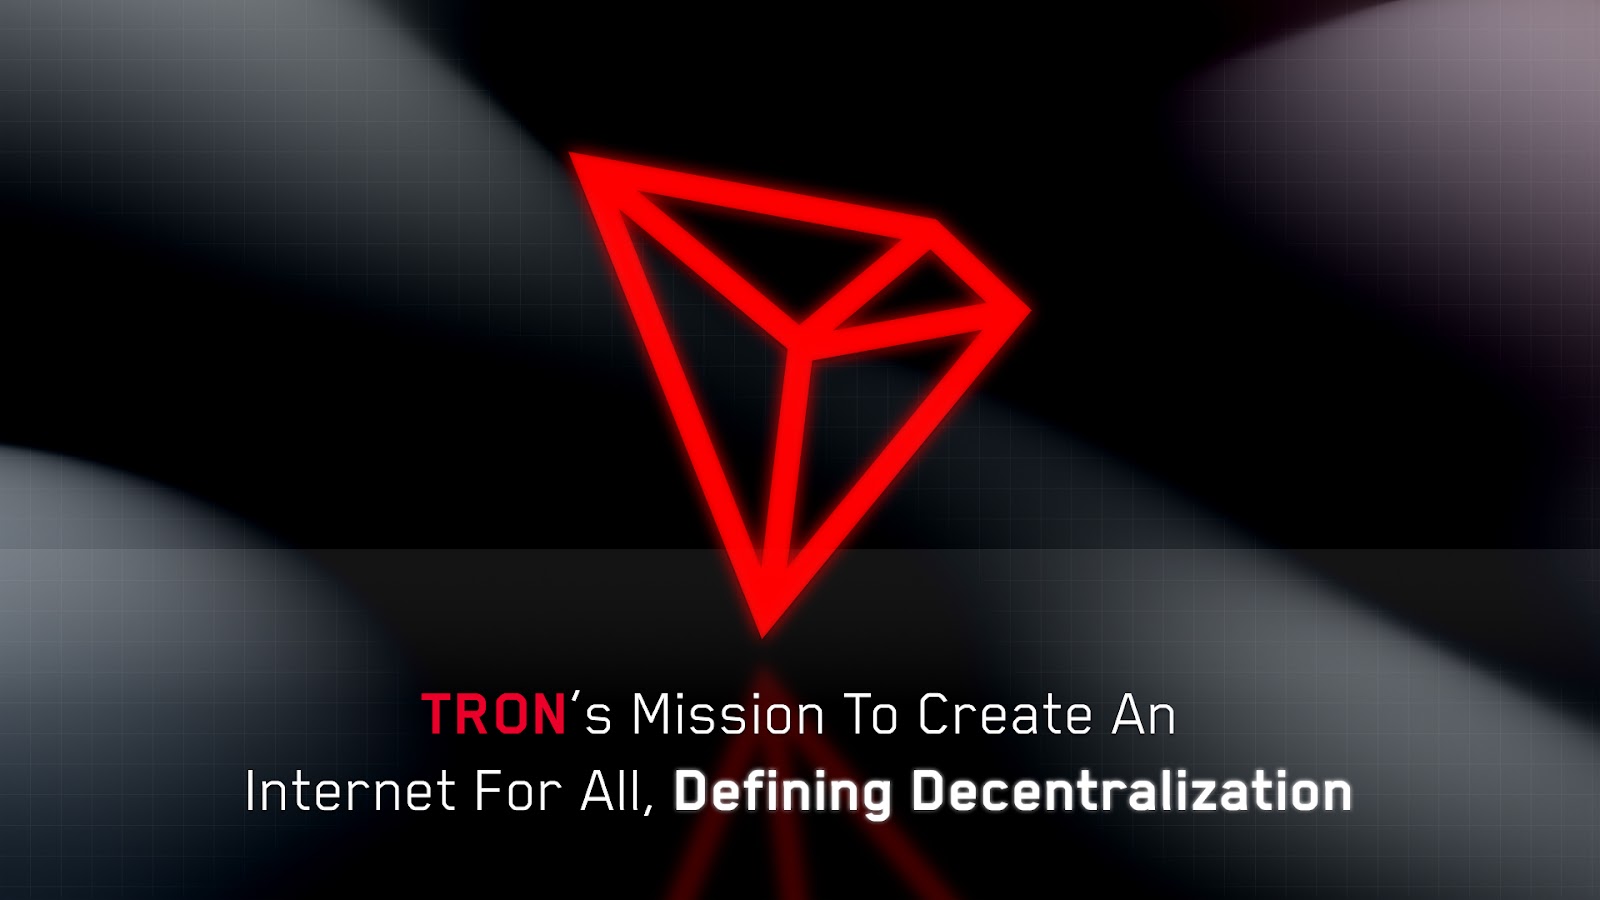 TRON’s Mission to Create an Internet for All, Defining Decentralization – Press release Bitcoin News